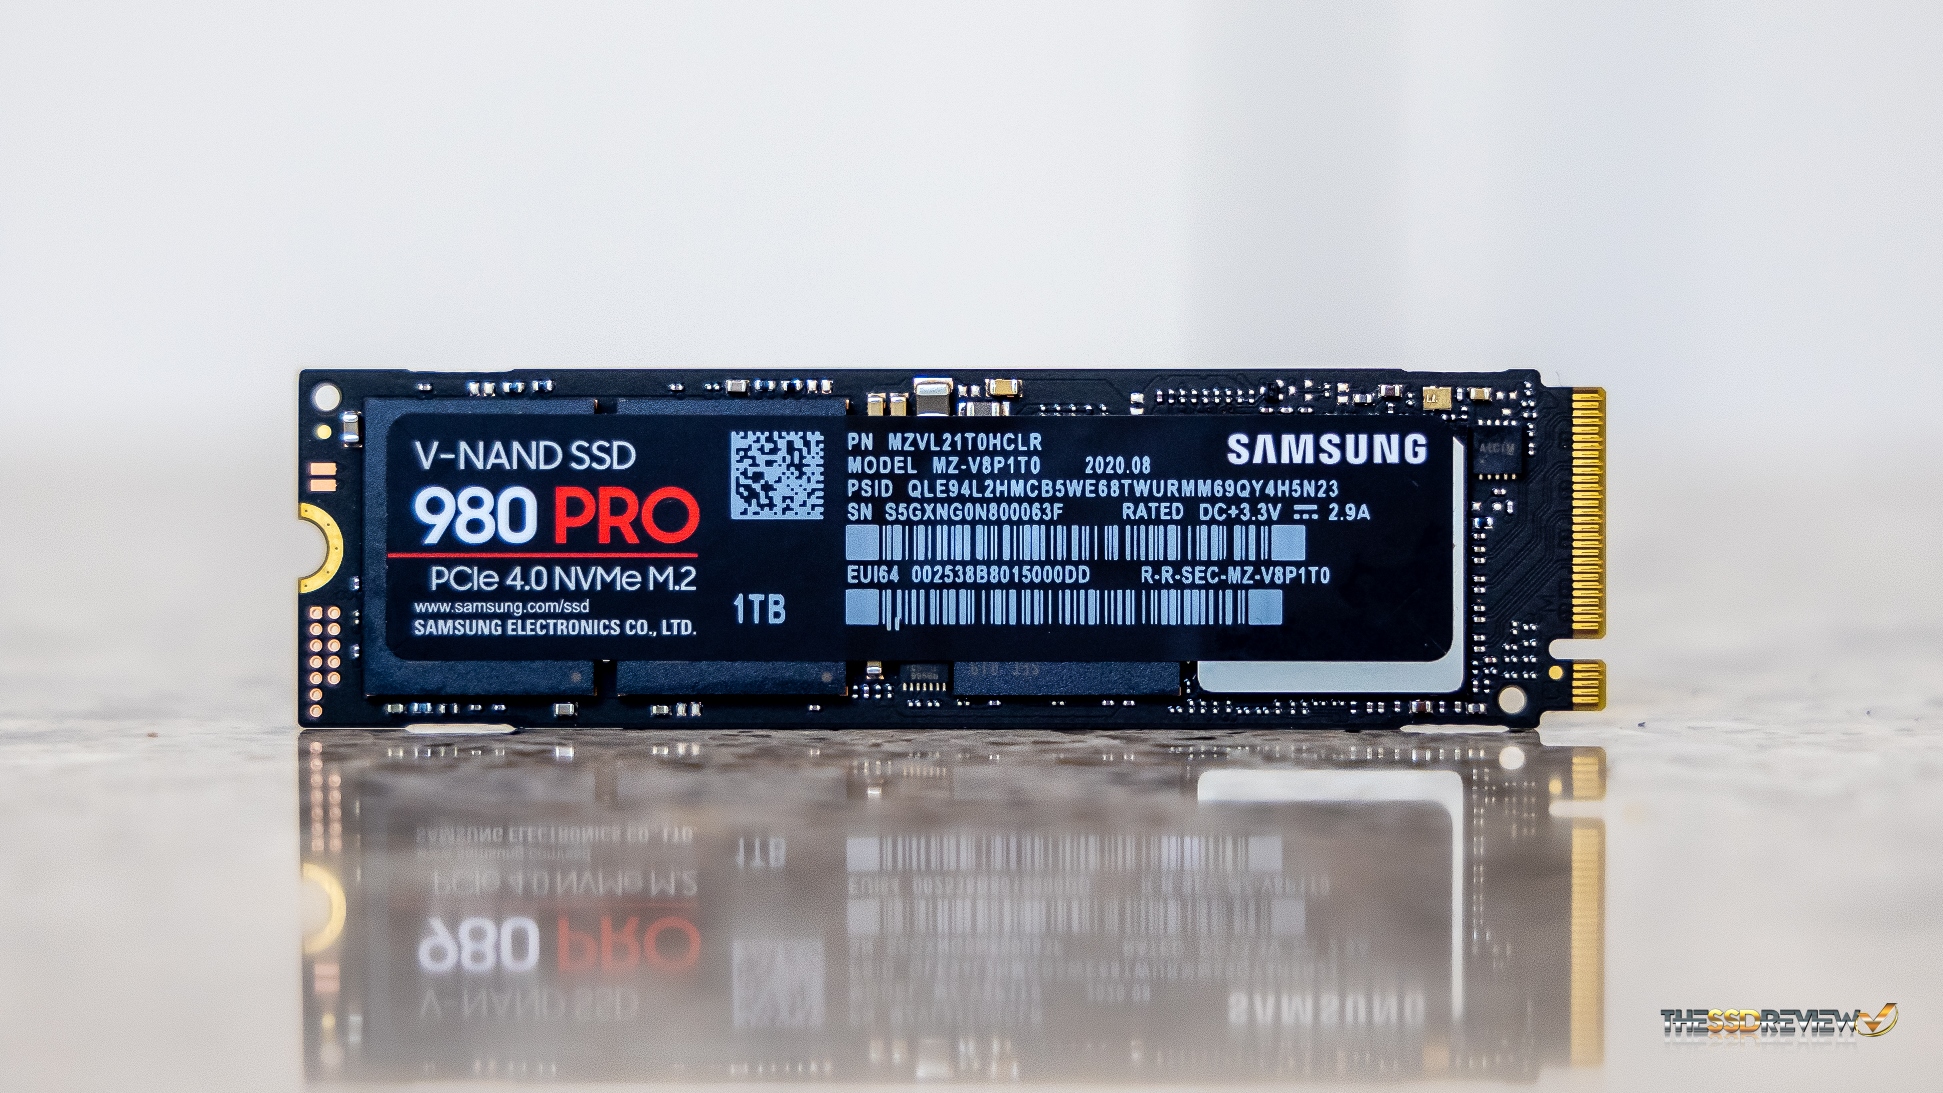 Umeki Bliv klar Encyclopedia Samsung 980 Pro Gen 4 NVMe SSD Review (1TB/250GB) - 7GB/s Speed with Cooler  Temps | The SSD Review